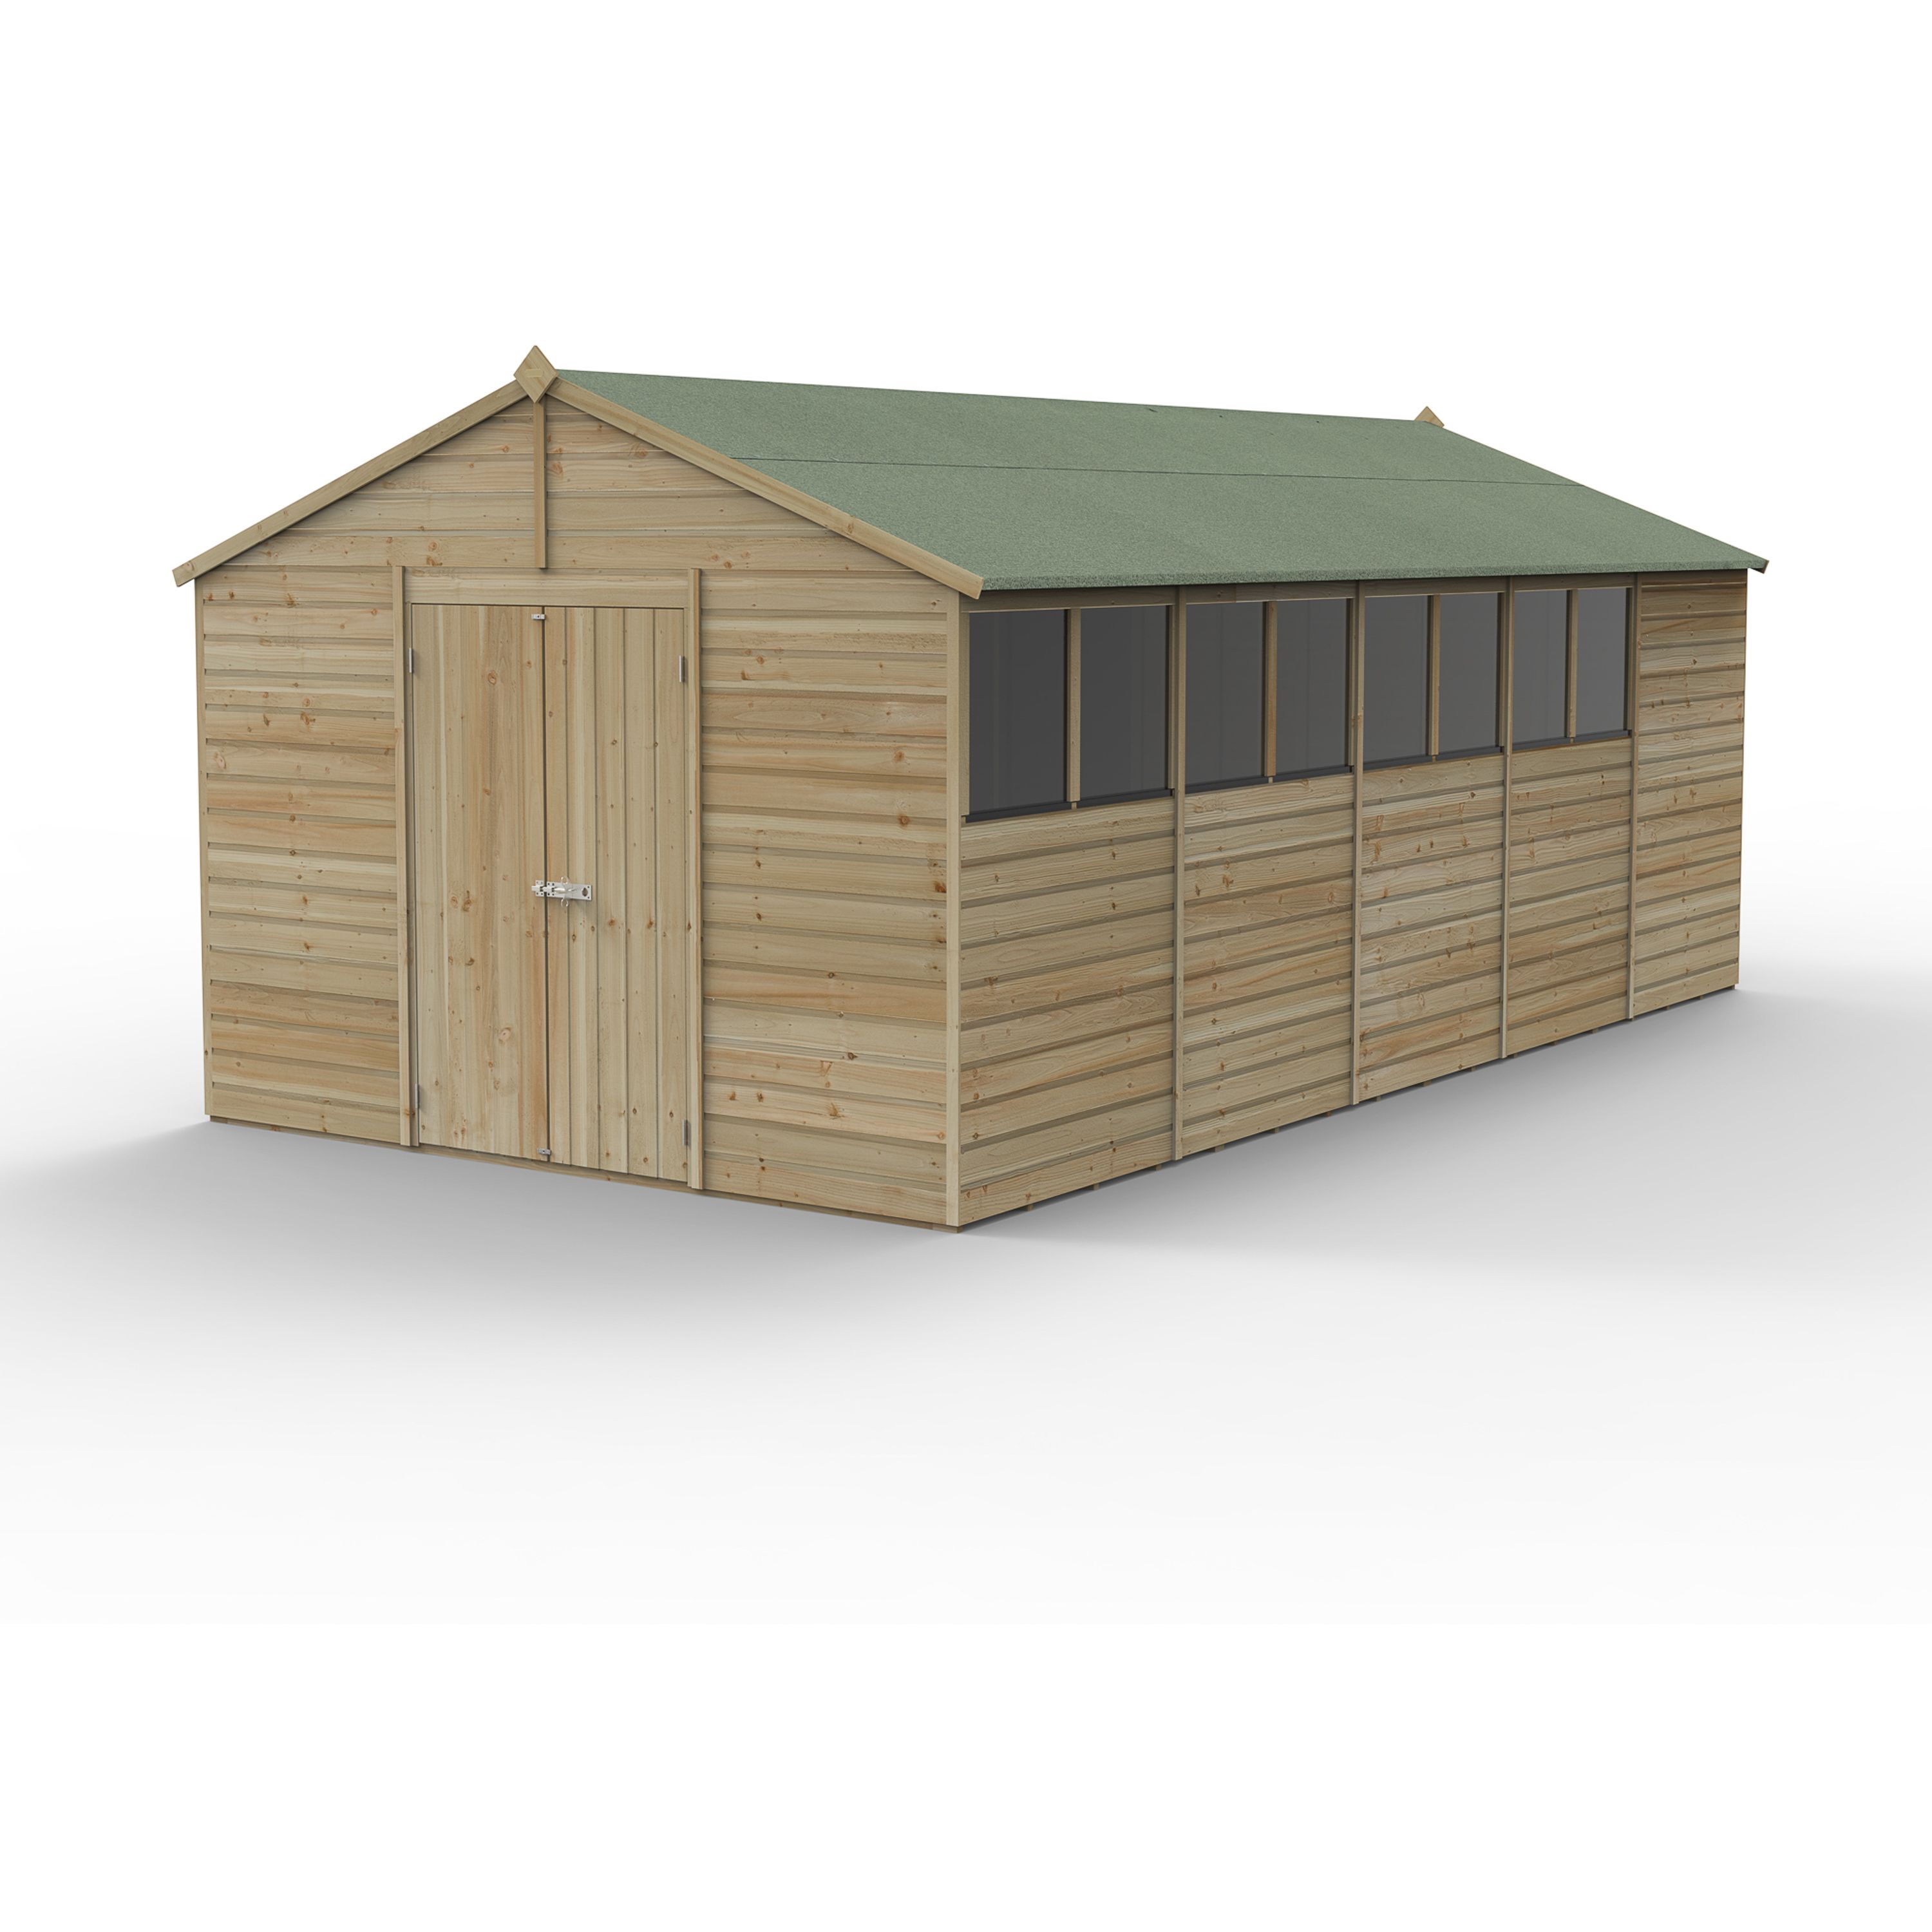 Forest Garden Beckwood 20x10 ft Apex Natural timber Wooden 2 door Shed with floor & 8 windows - Assembly not required